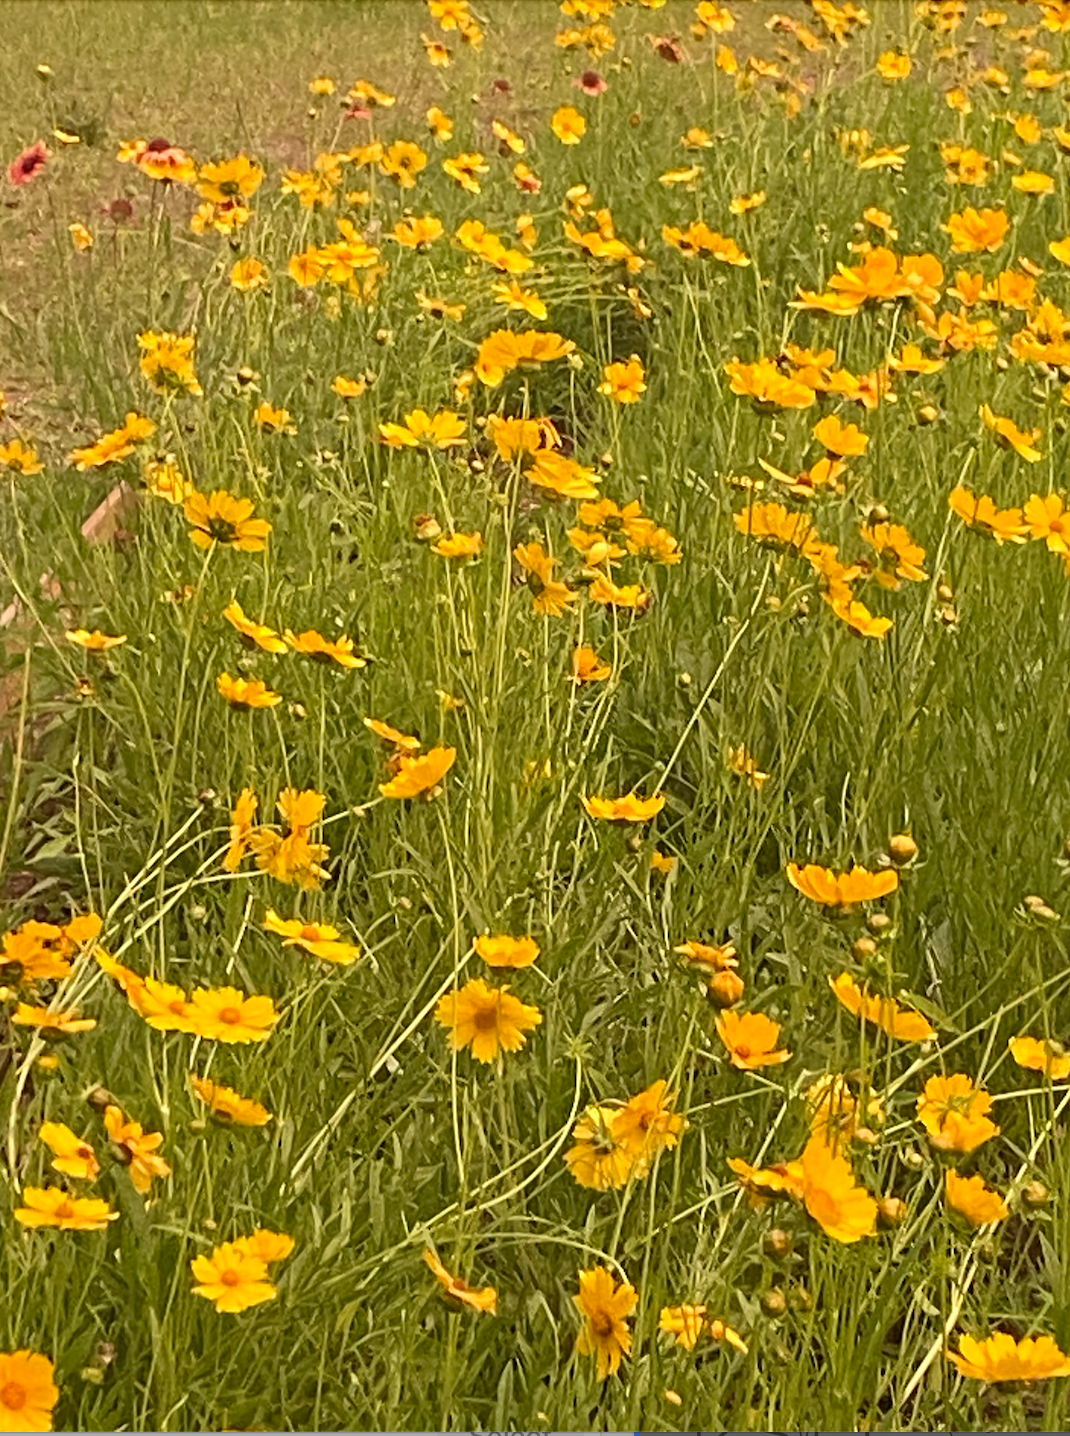 Locally Flowered Wildflowers And Native